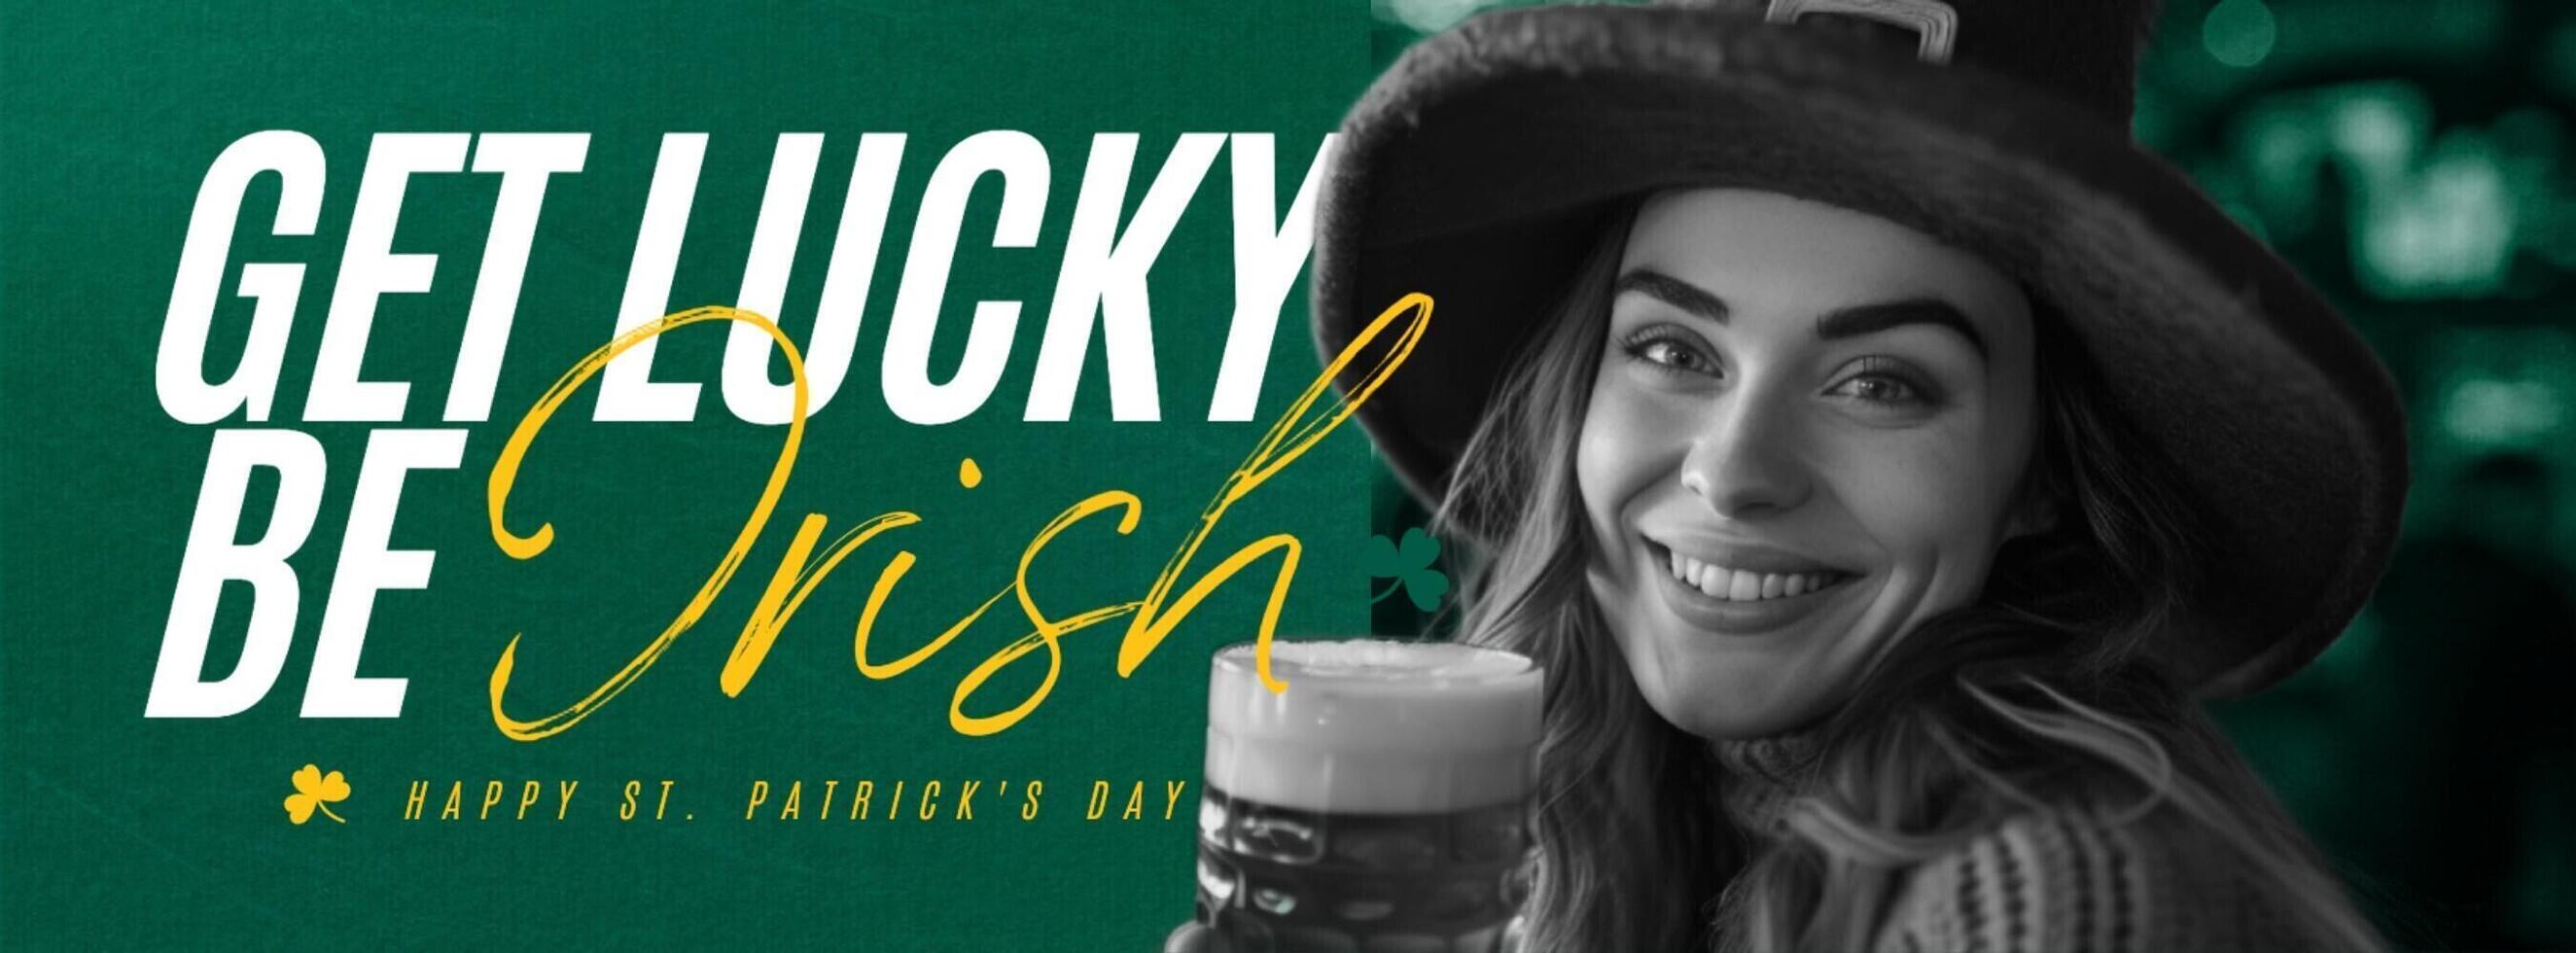 Get Lucky Be Irish for Facebook Cover template